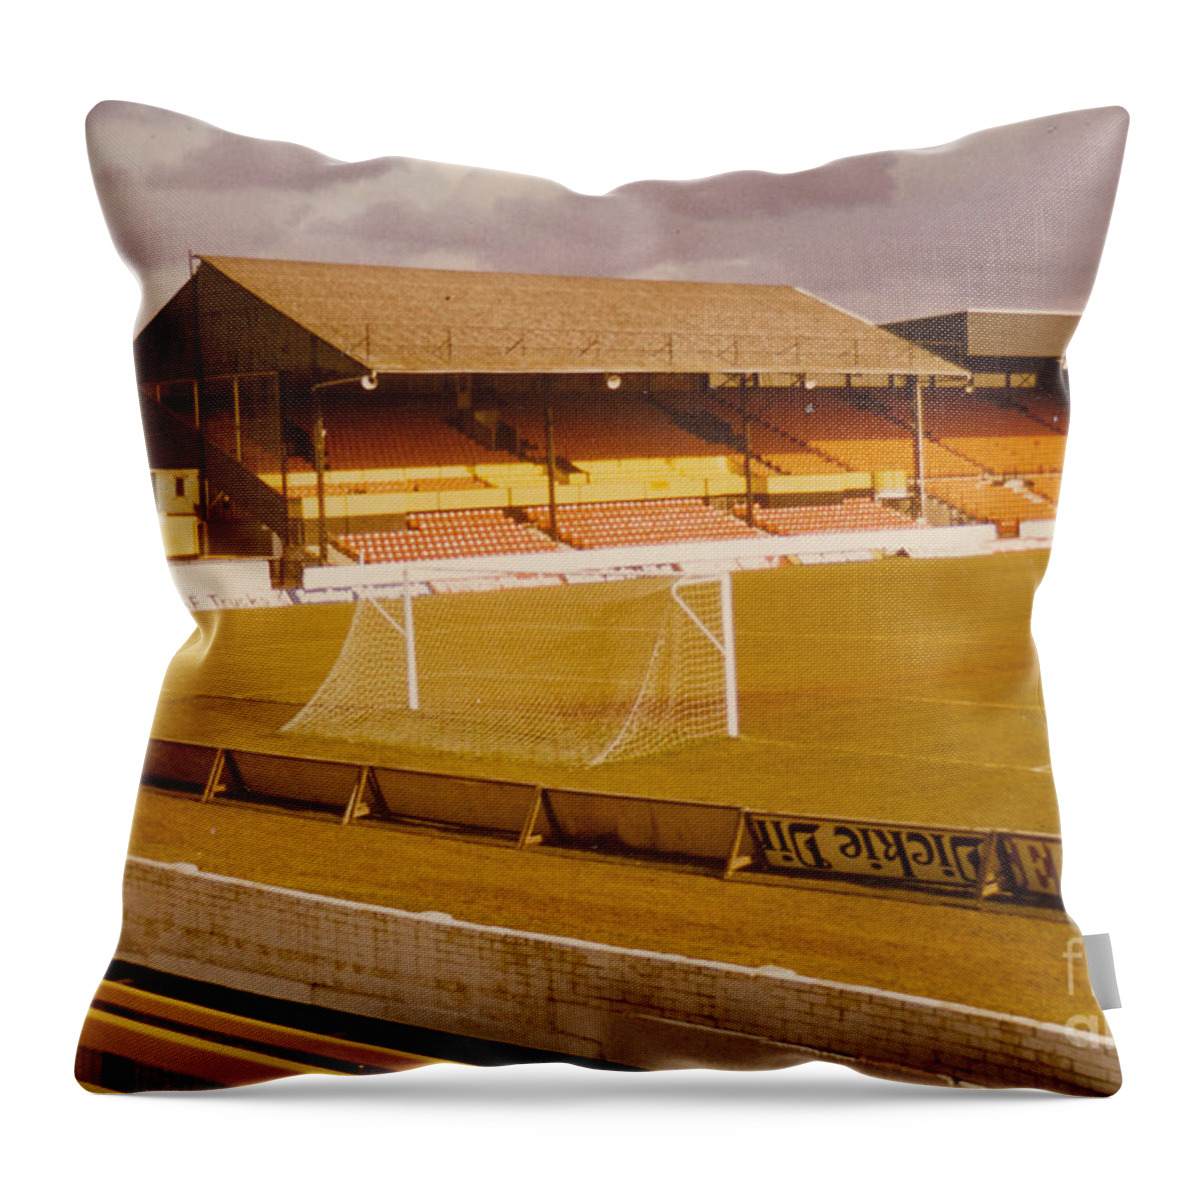  Throw Pillow featuring the photograph Watford - Vicarage Road - Main Stand 2 - 1970s by Legendary Football Grounds